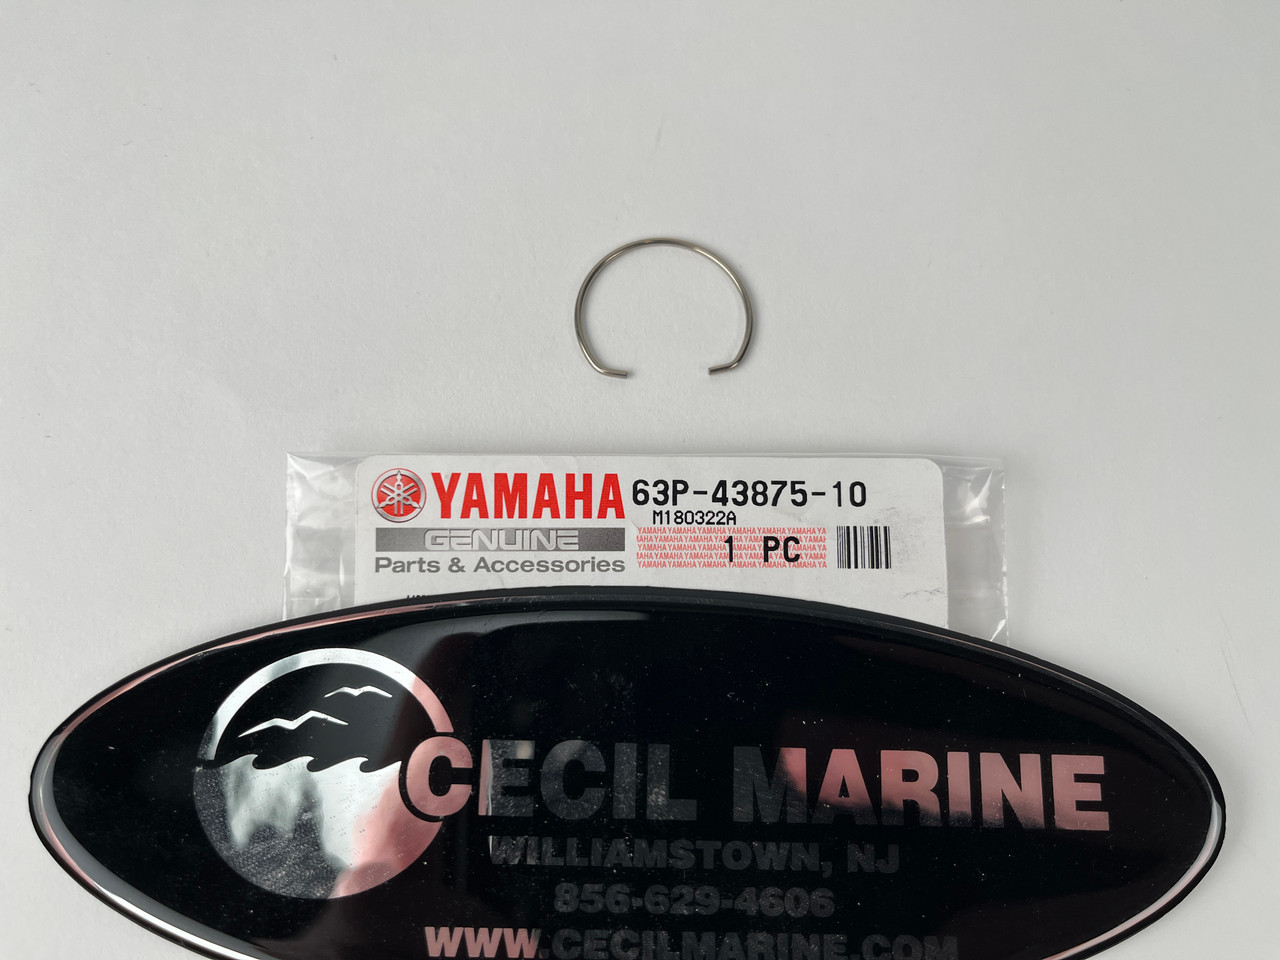 $2.99* GENUINE YAMAHA no tax* RING, SNAP 63P-43875-10-00 *In Stock & Ready To Ship